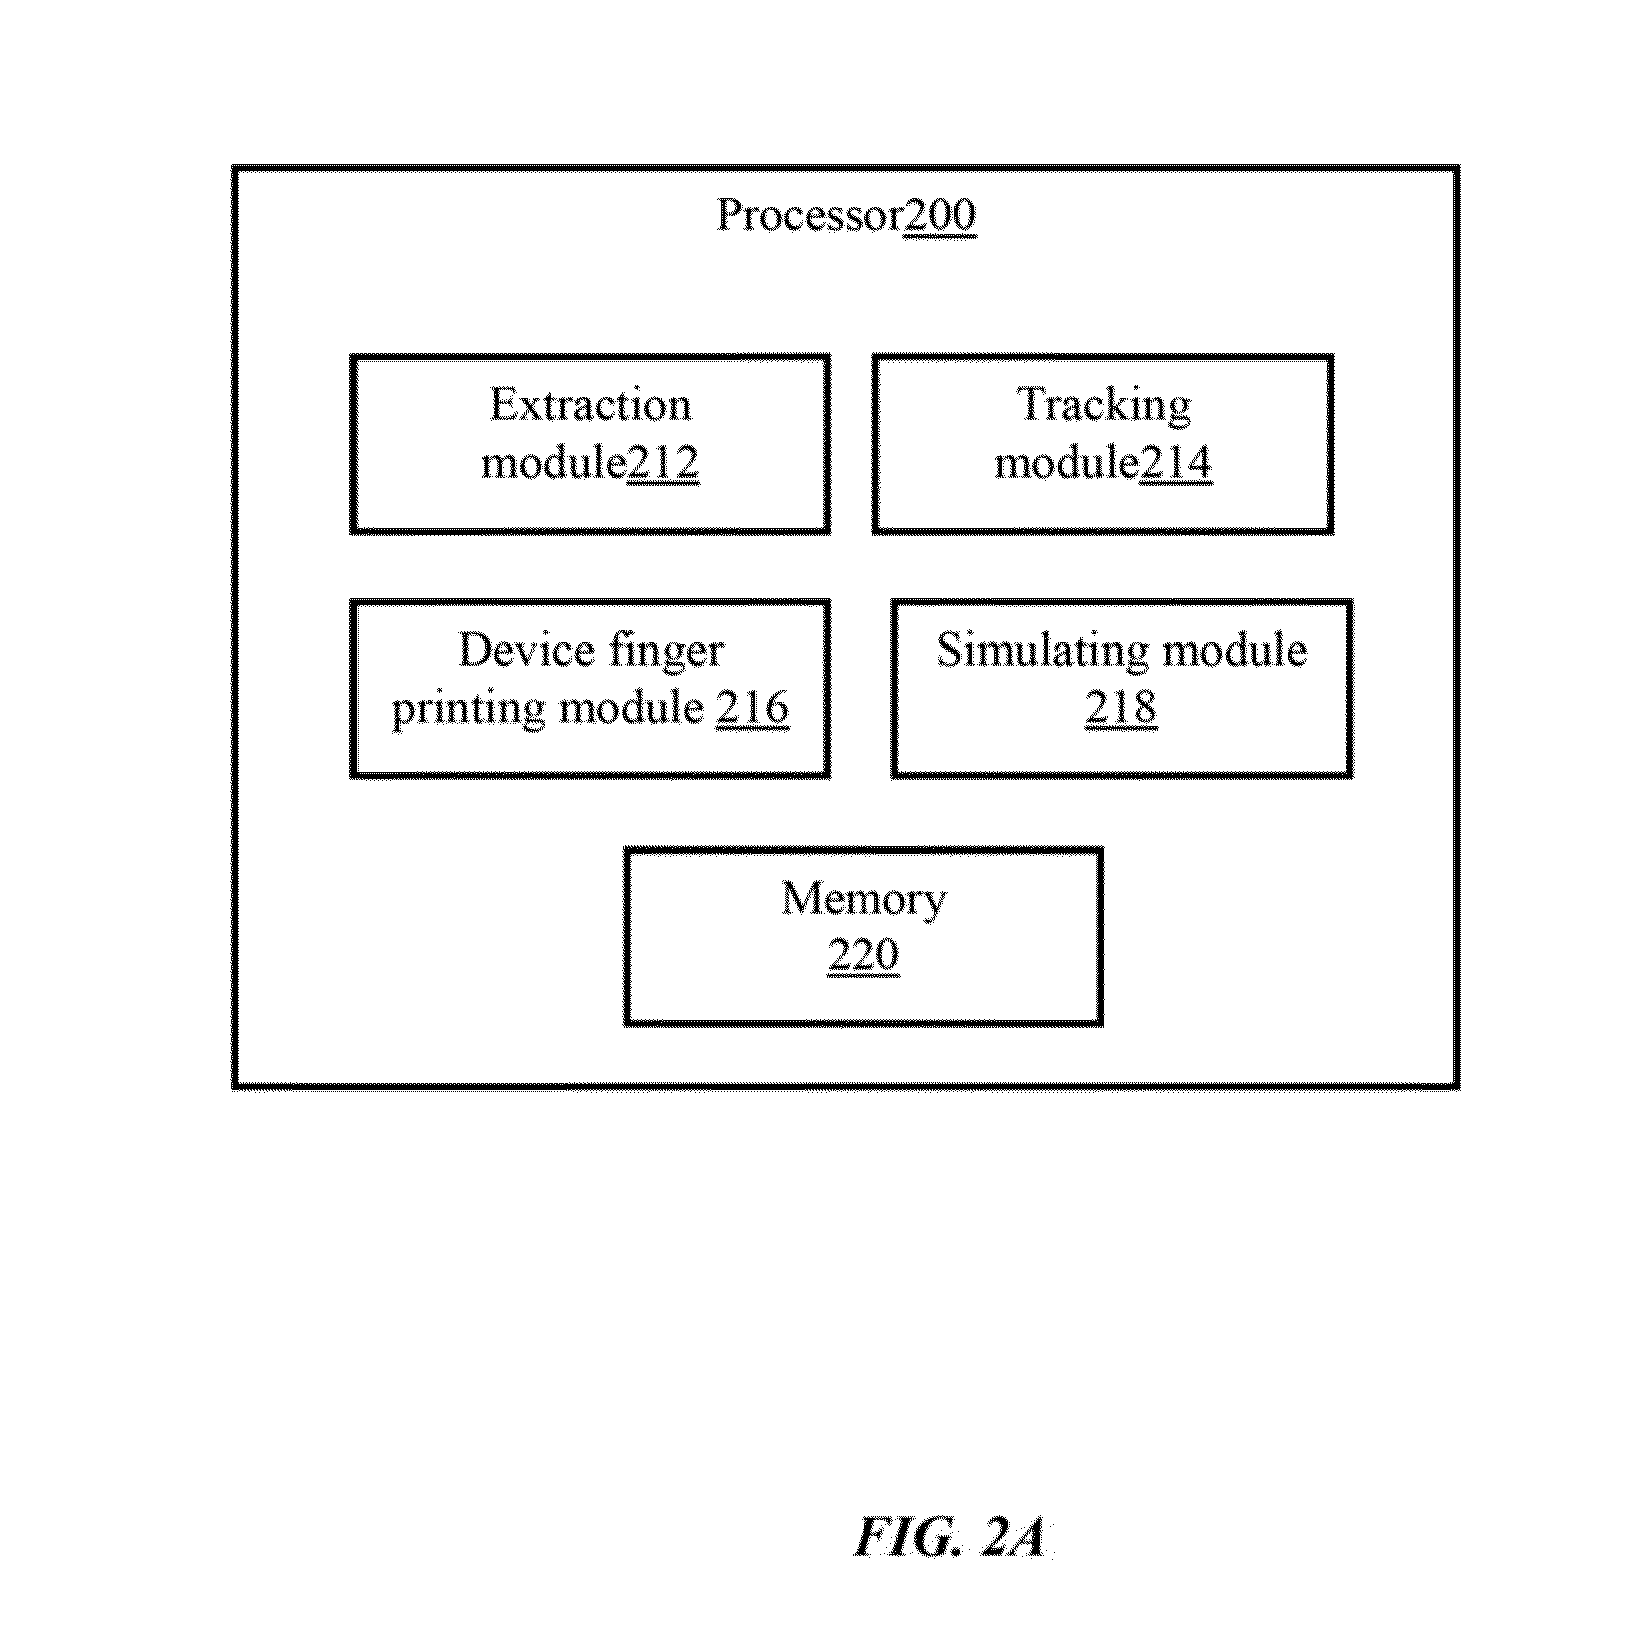 System and method for simulating internet browsing system for user without graphical user interface